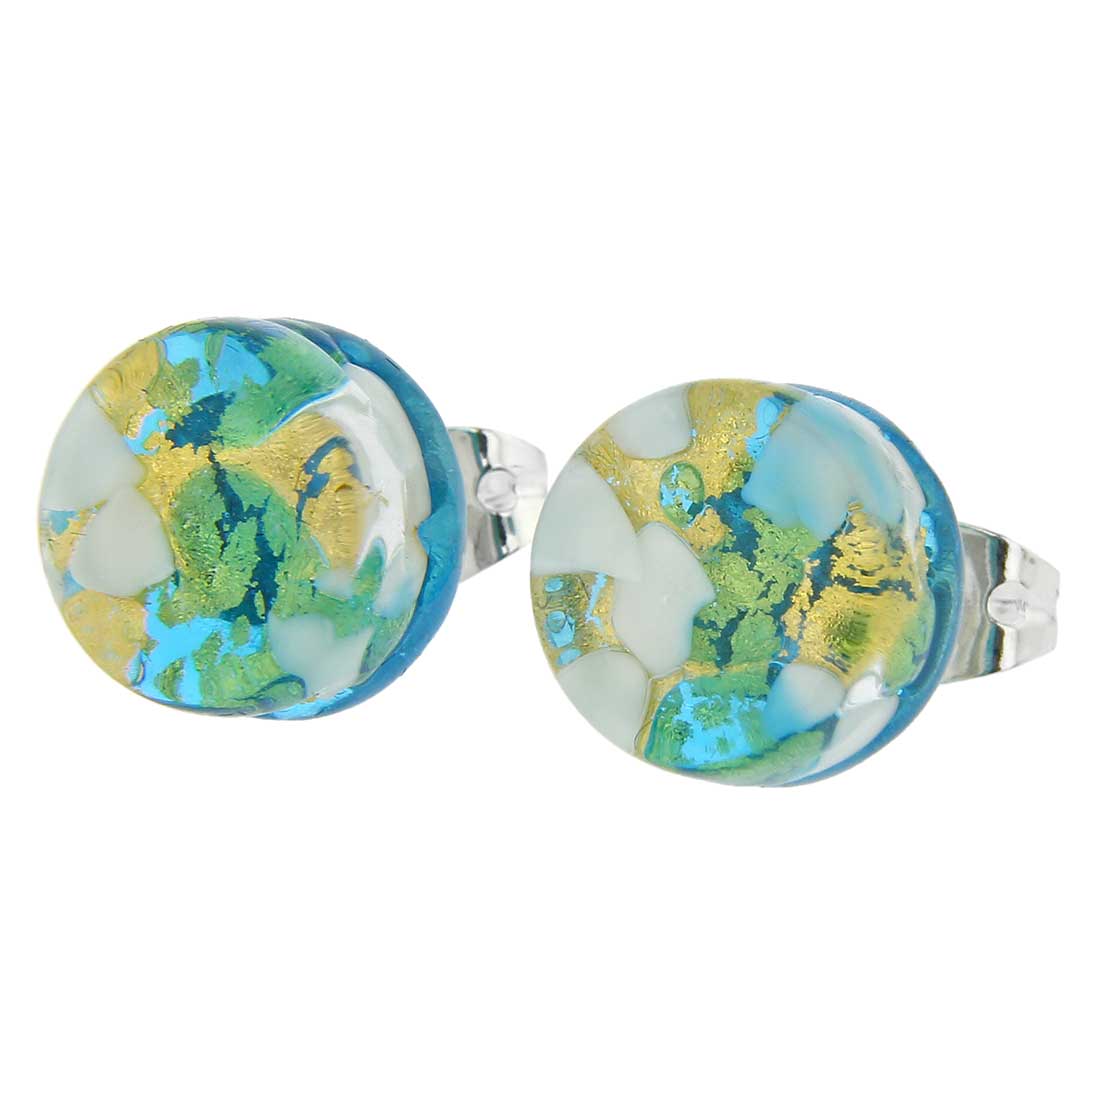 Venetian Reflections Round Necklace and Earrings Set - Aqua Gold